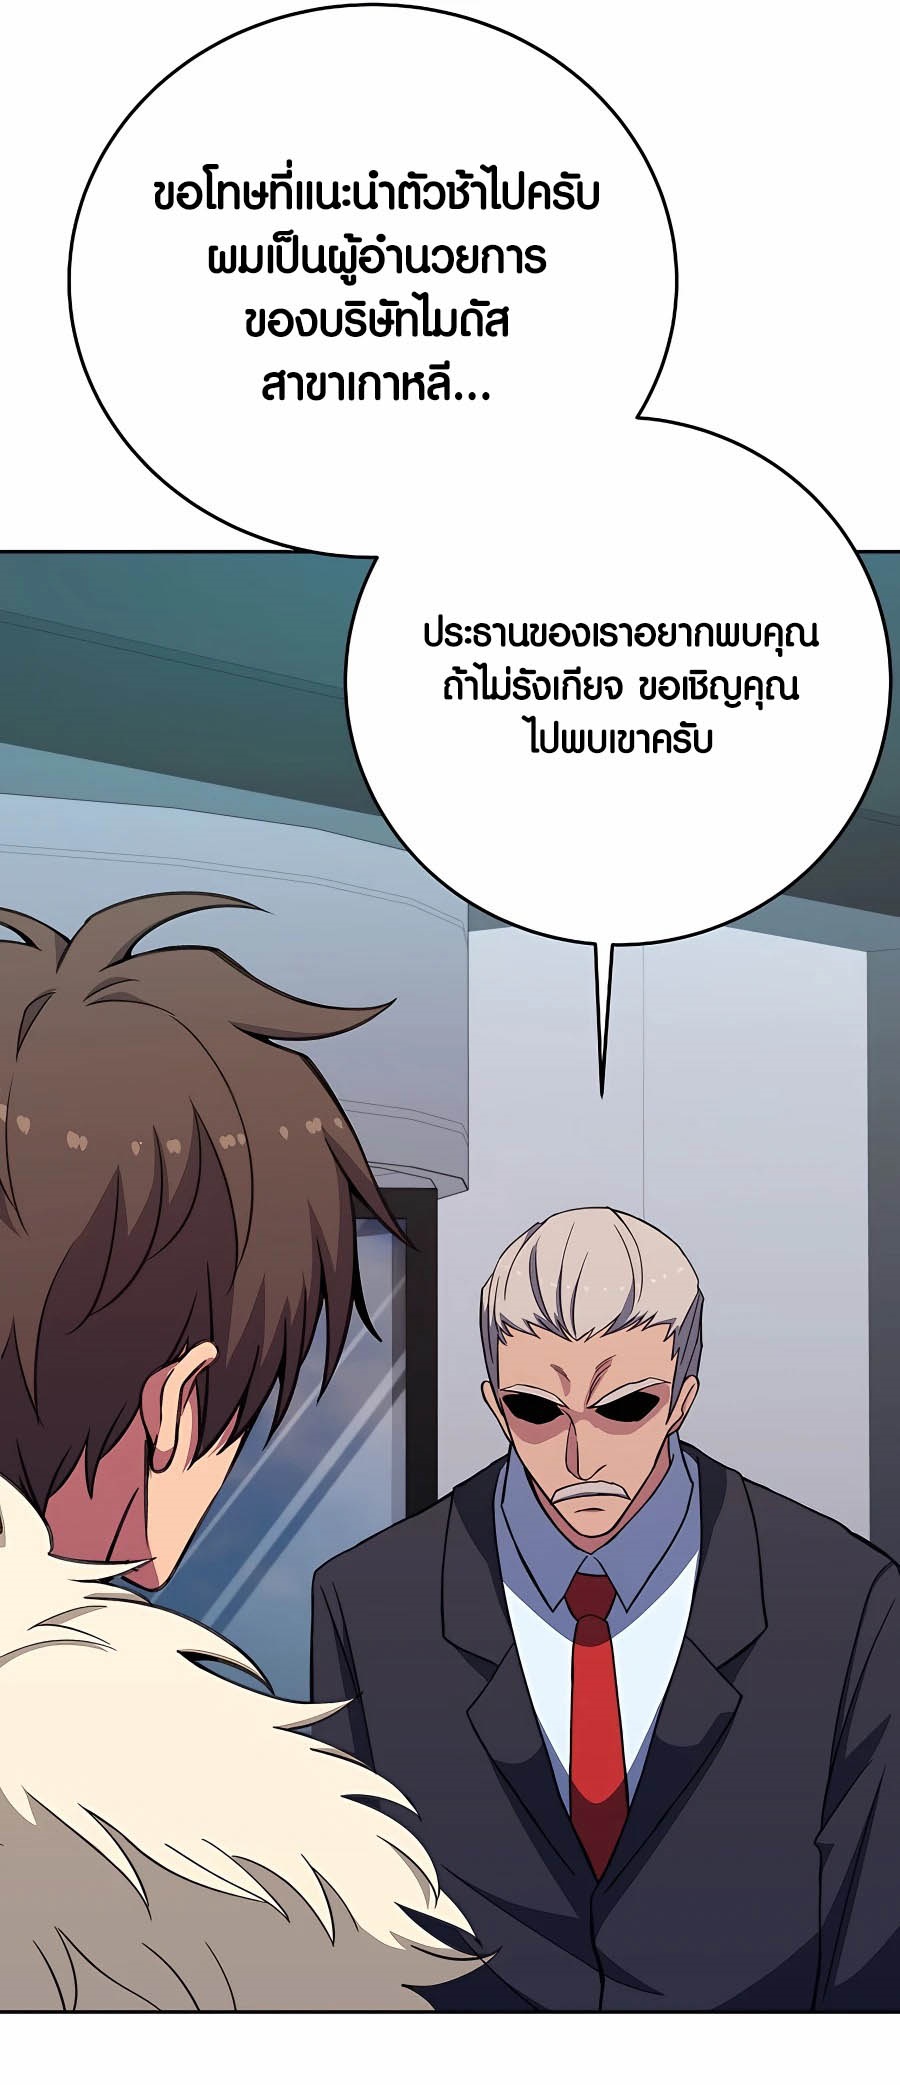 à¸­à¹ˆà¸²à¸™à¸¡à¸±à¸™à¸®à¸§à¸² à¹€à¸£à¸·à¹ˆà¸­à¸‡ The Part Time Land of the Gods 56 13